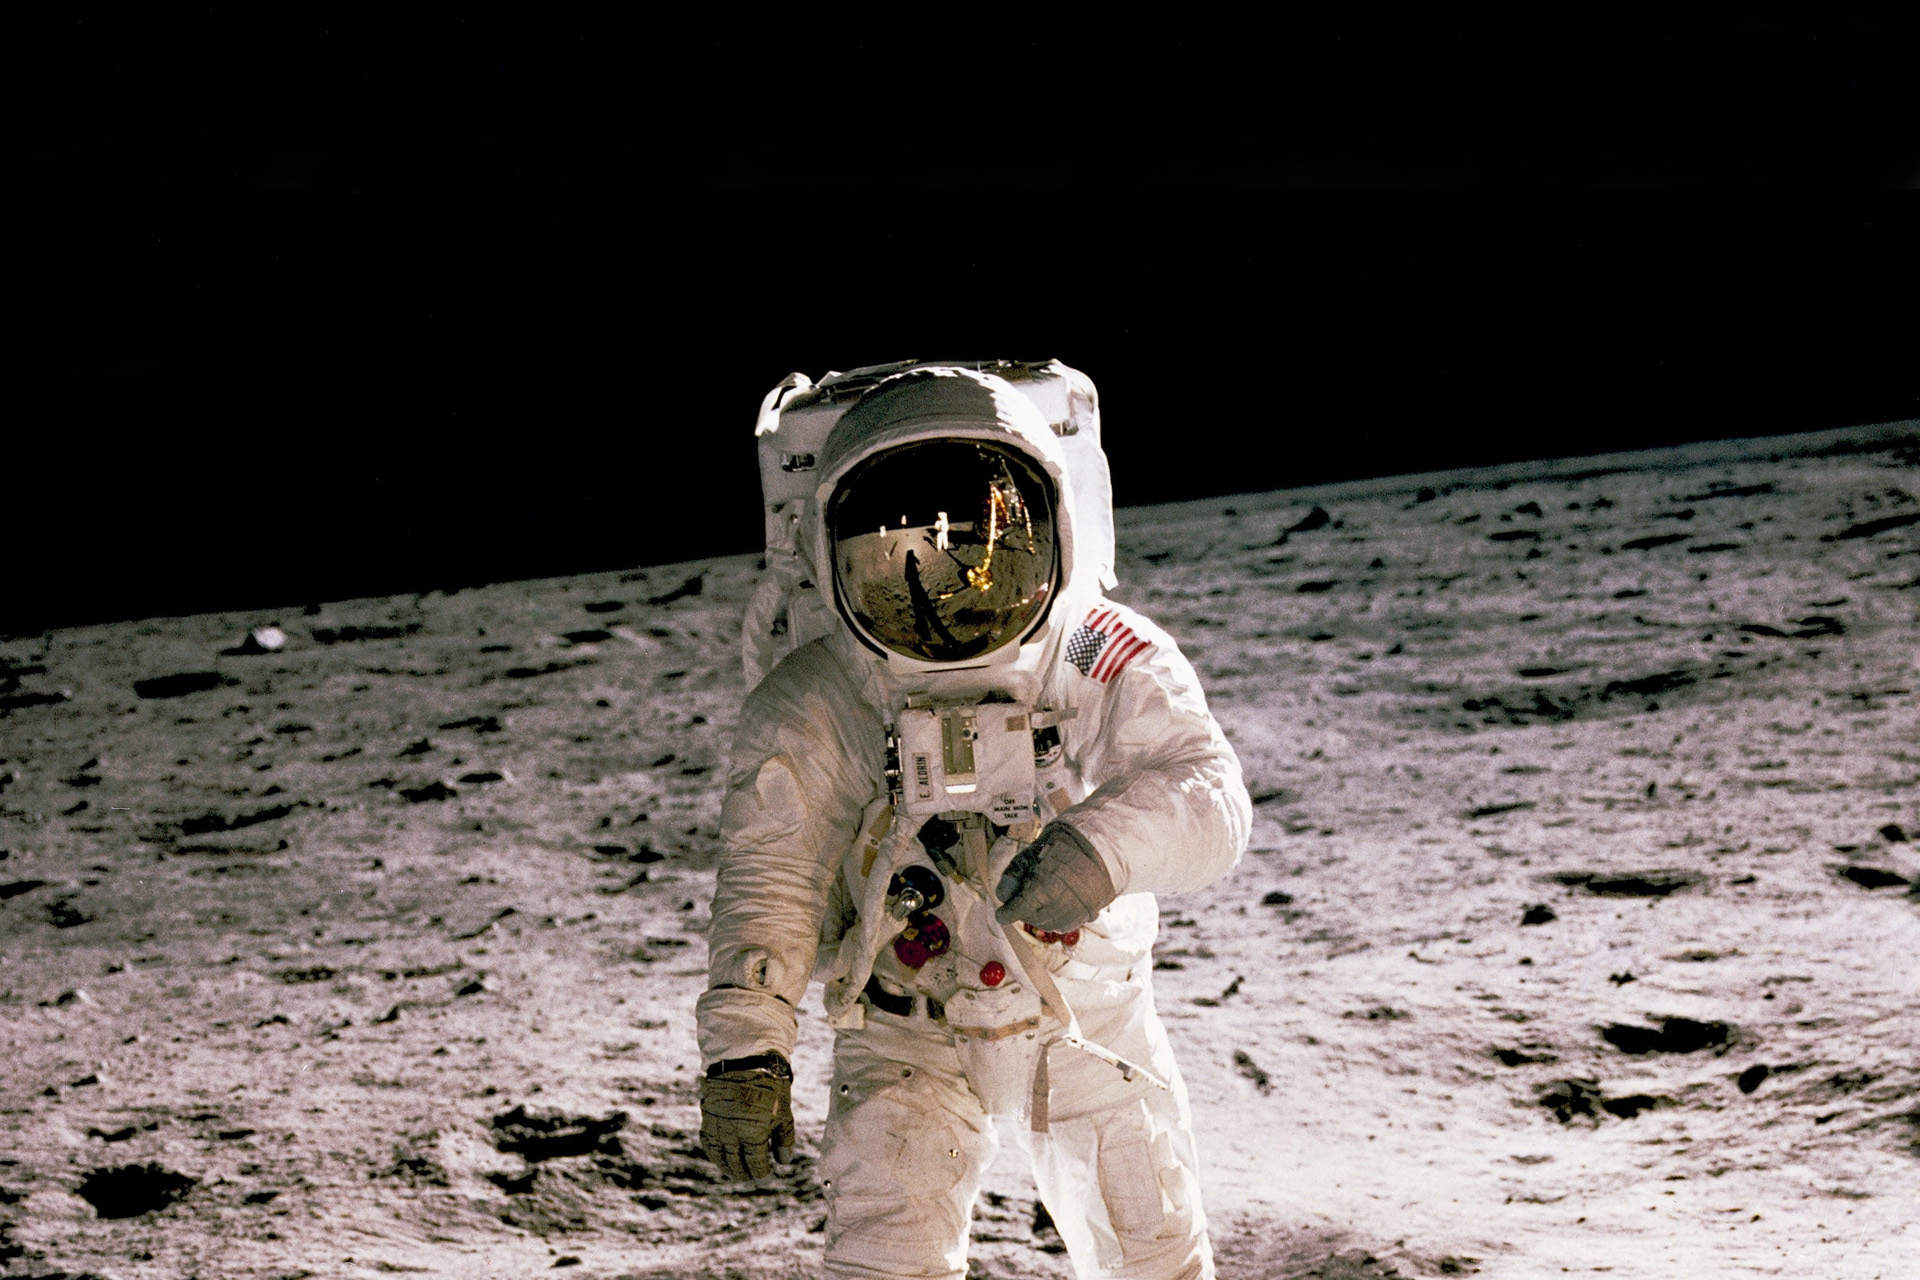 Apollo 11 astronaut Buzz Aldrin walks on the surface of the moon on July 20, 1969, in a photograph taken by Neil Armstrong.